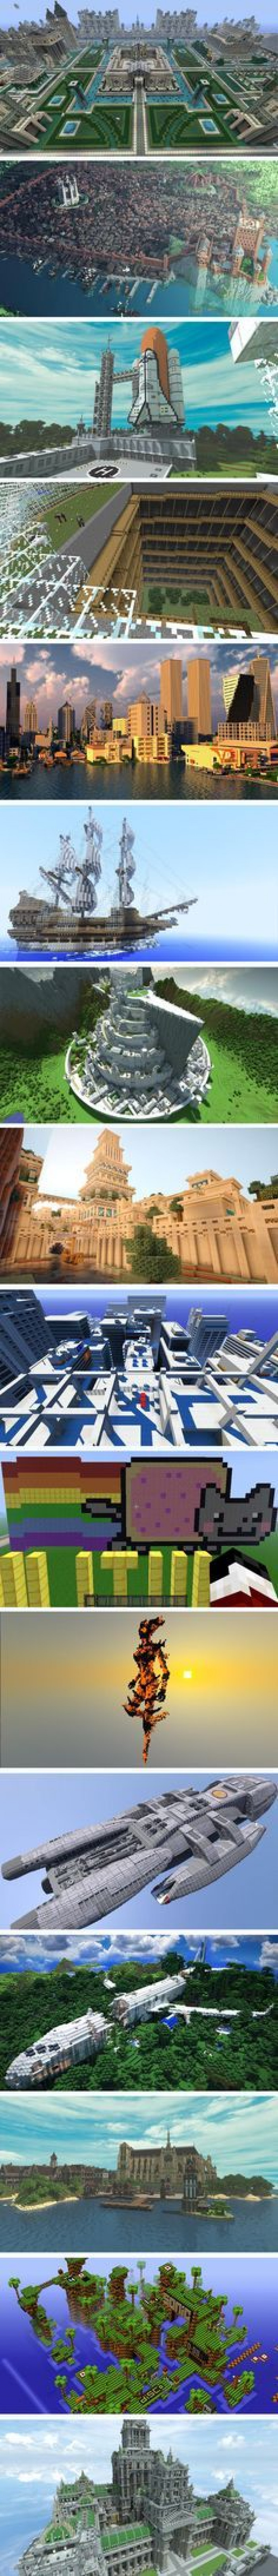 25 'Minecraft' Creations That Will Blow Your Mind